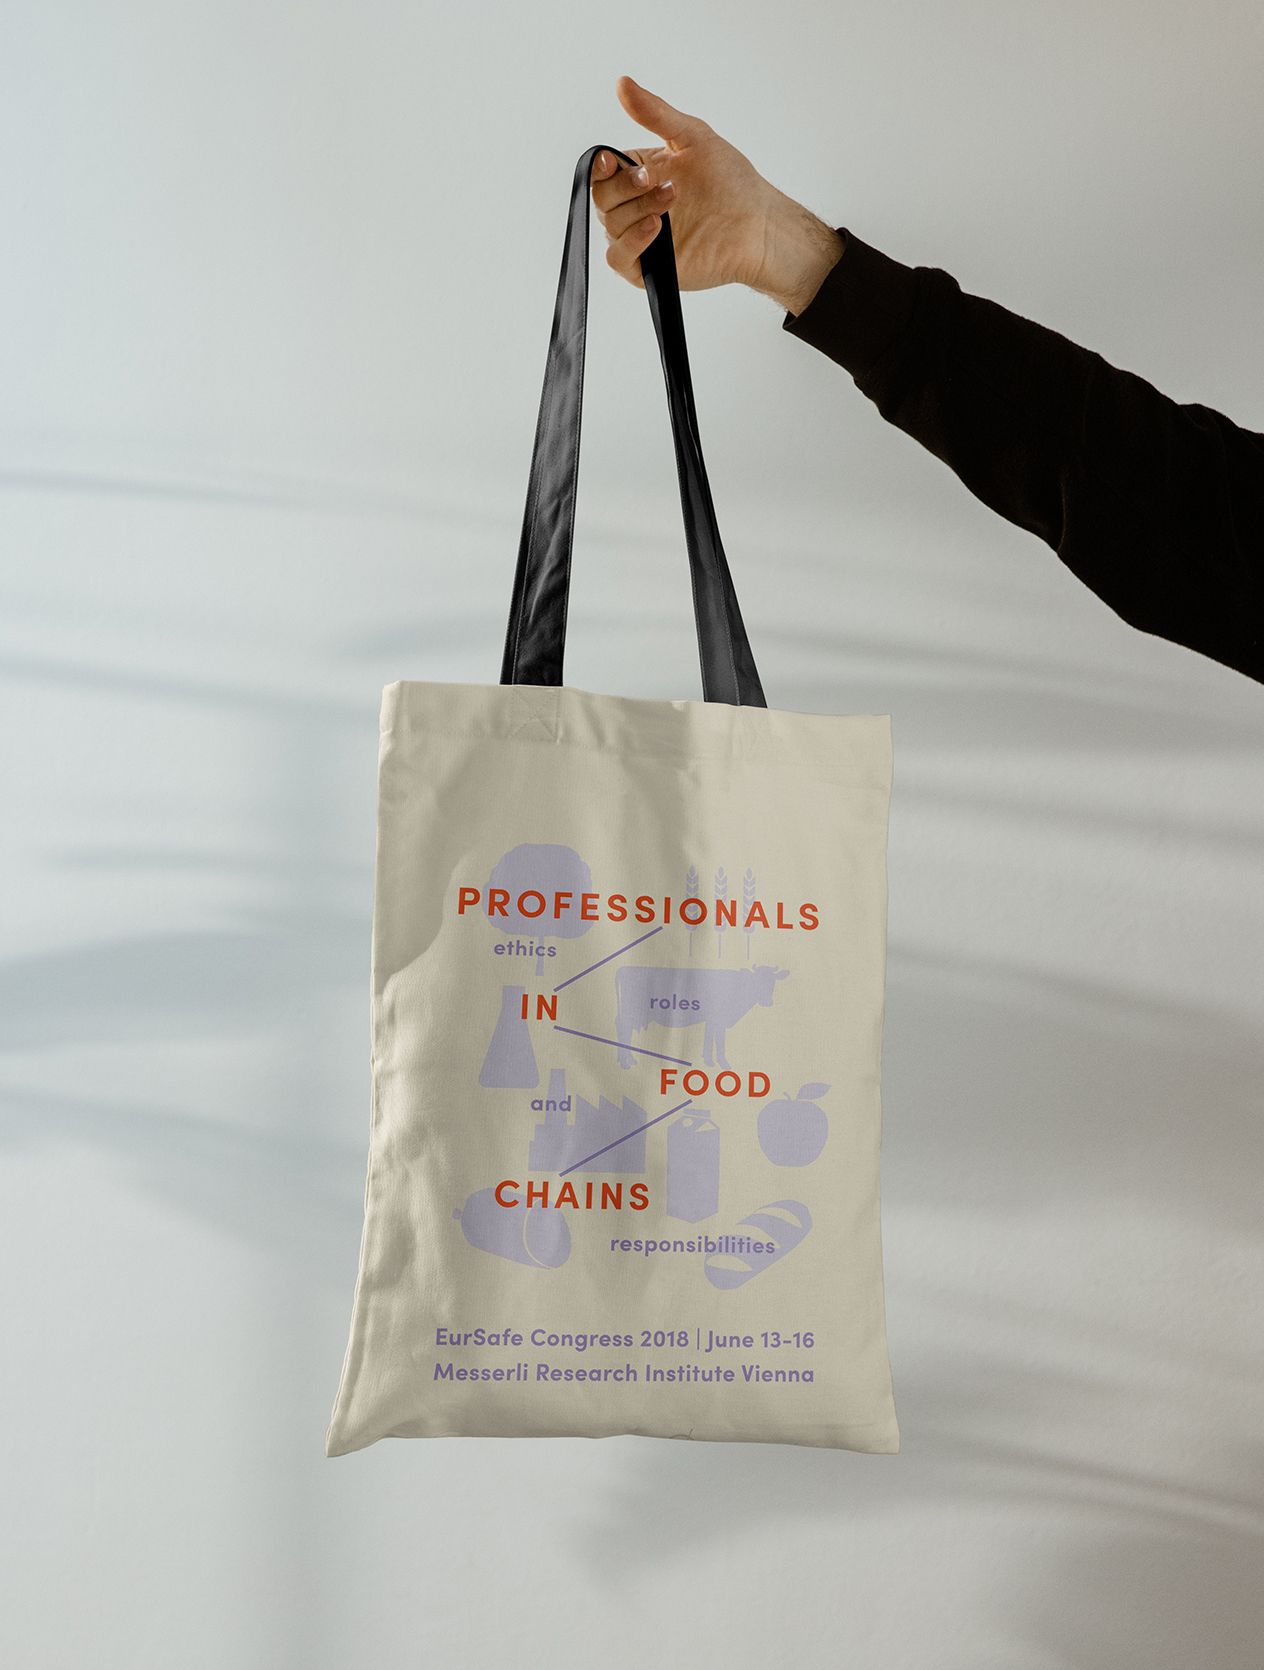 professionals-in-food-chains-branding-bag